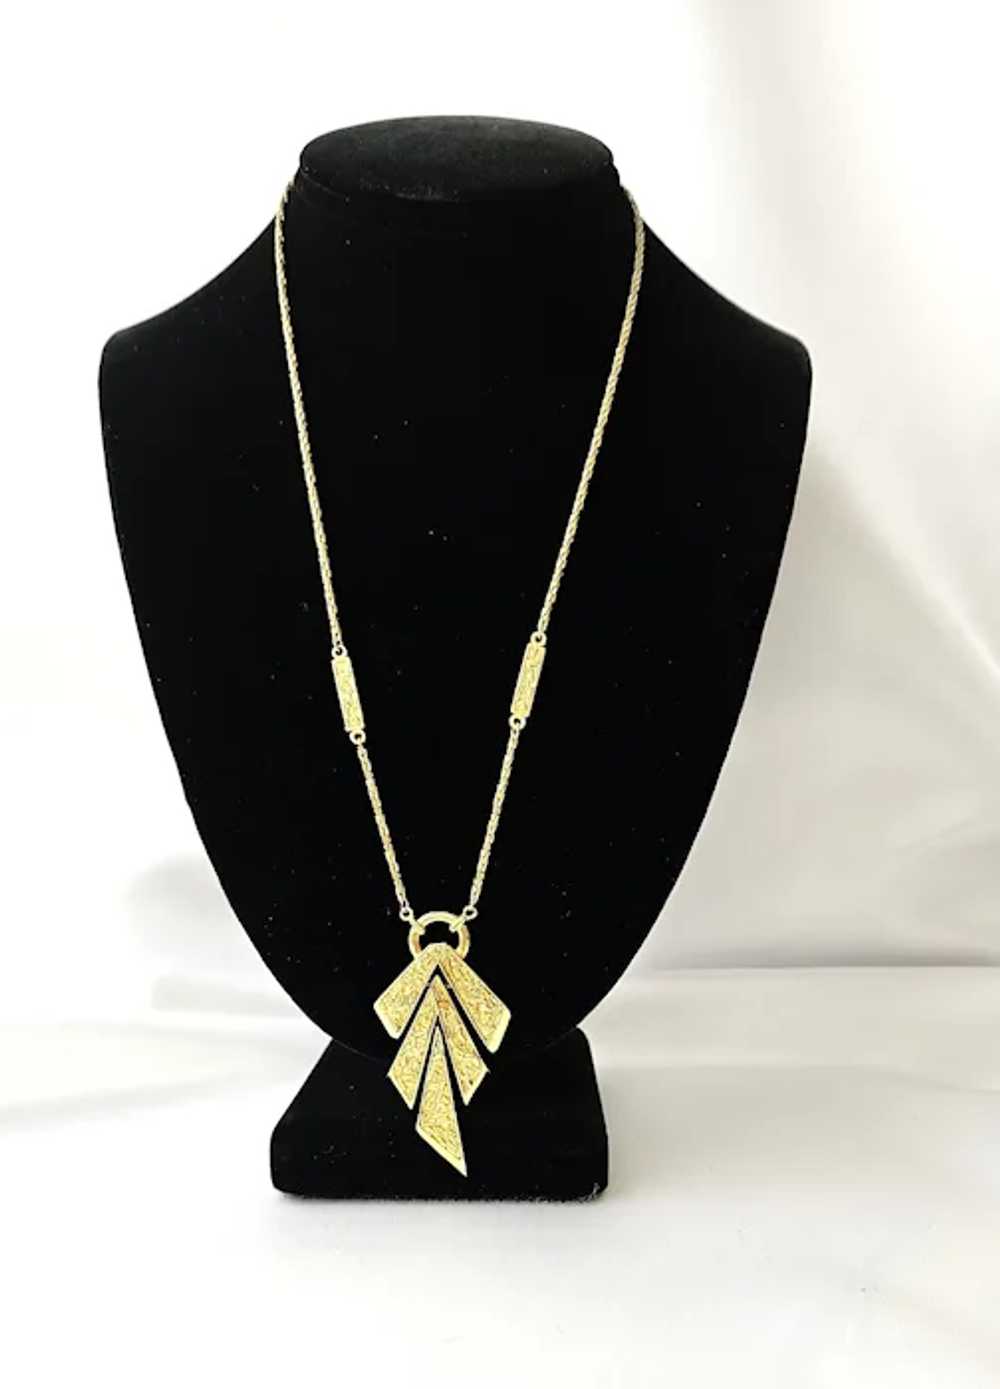 Vintage Trifari Gold-Tone Metal Sections Necklace - image 2